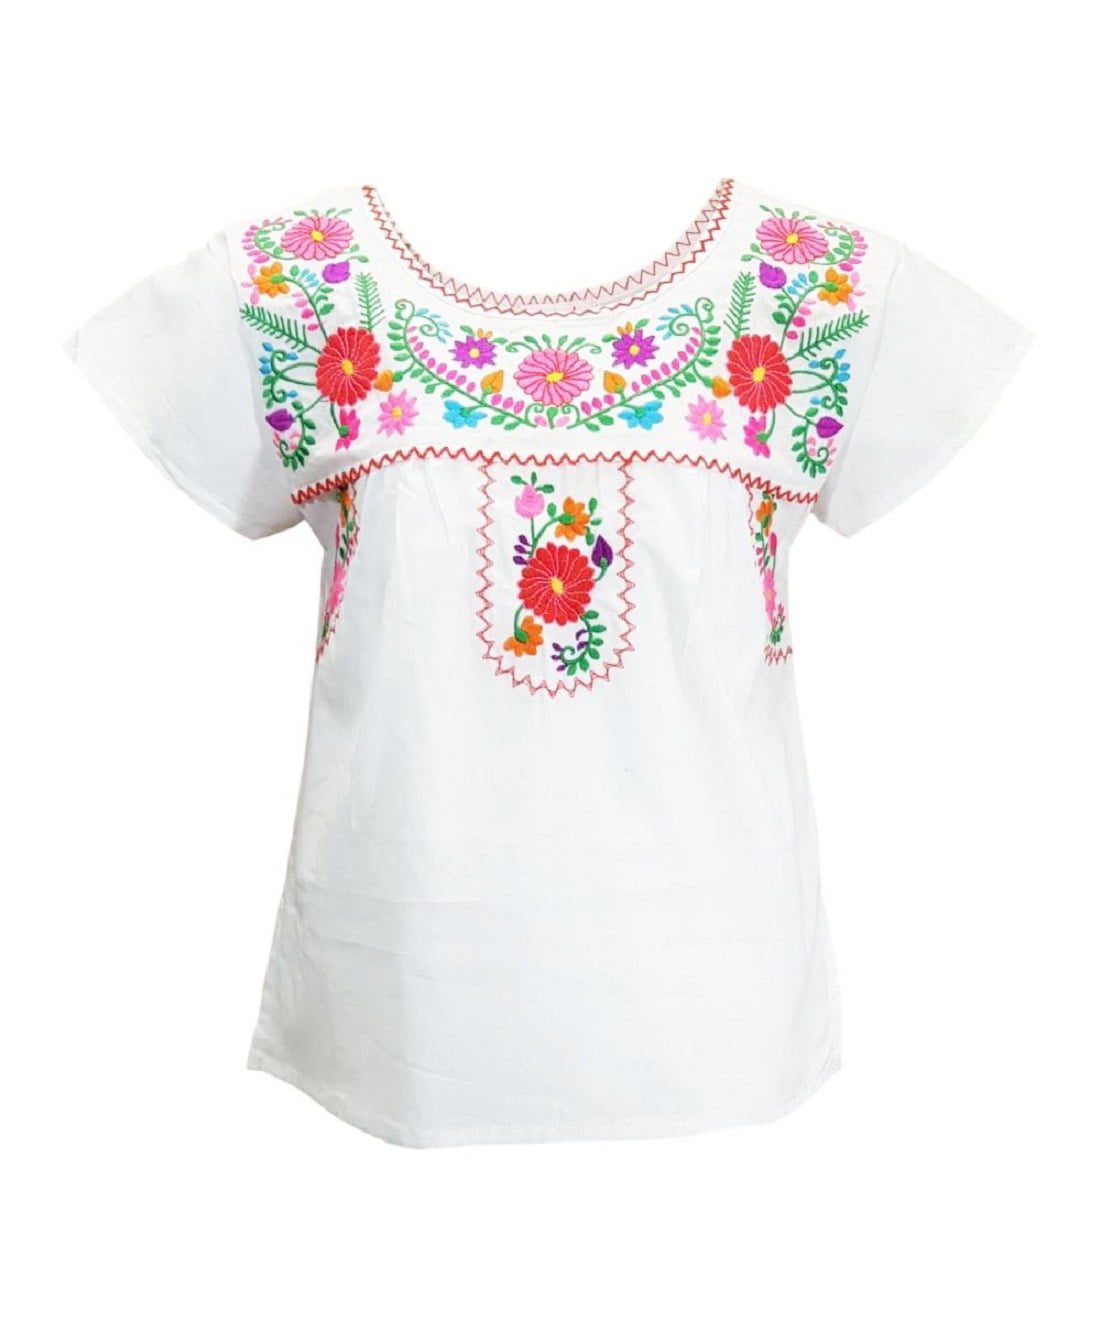 Vintage Blouse  Embroidered Smock Top  Flowered White Tunic  Colorful Floral Short Sleeve  Cotton Shirt Size Small